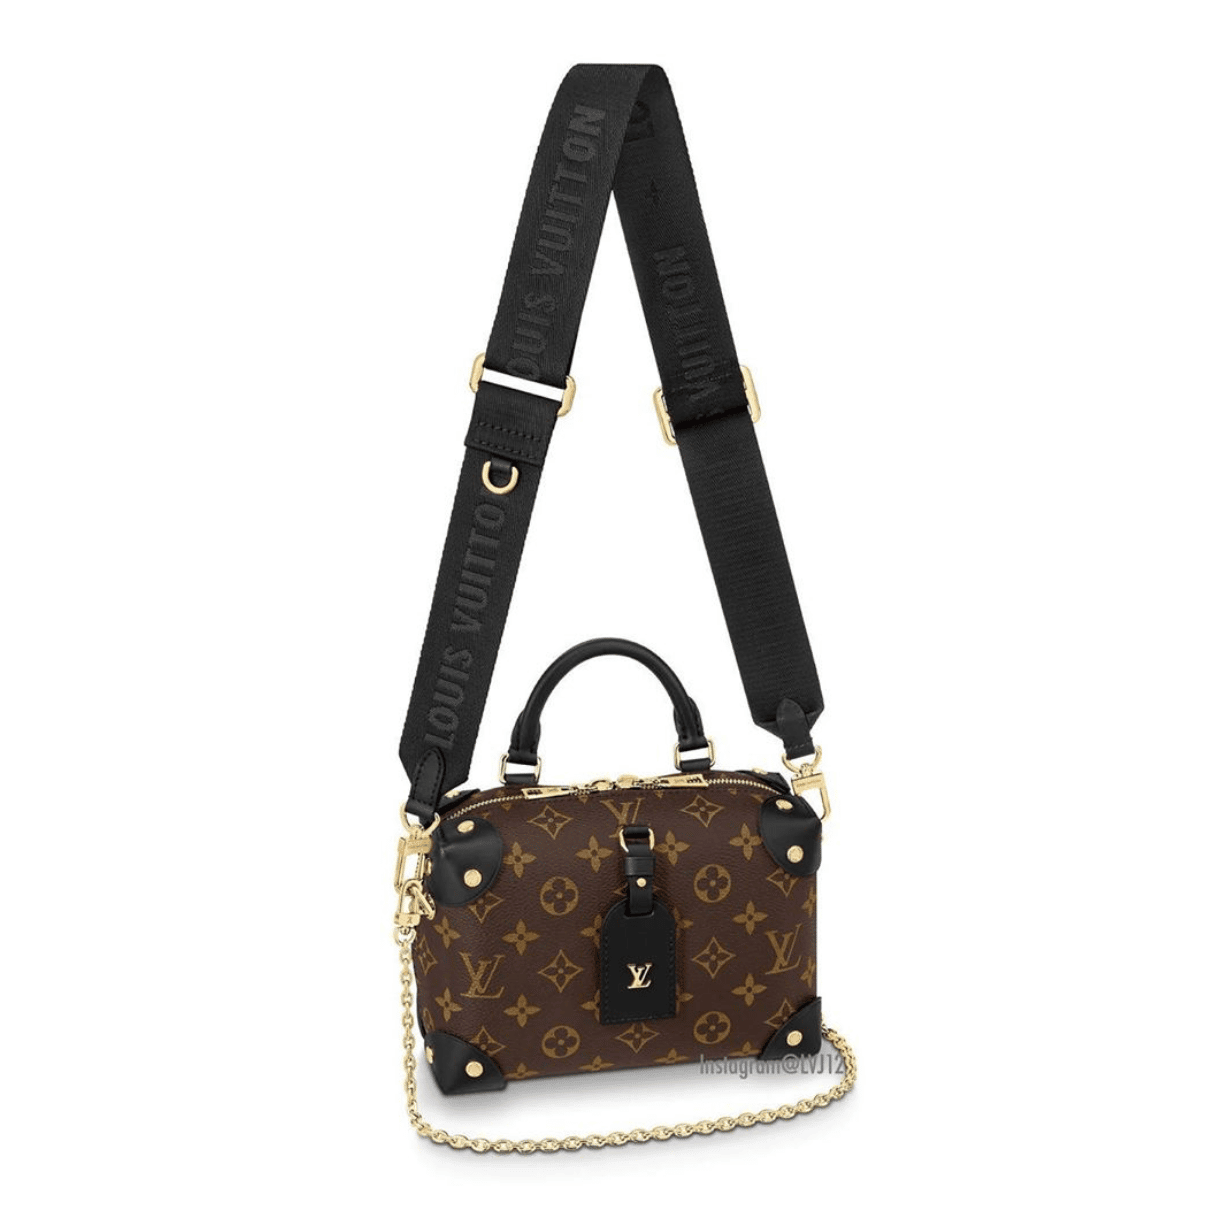 I LOVE the new #LVFW23 petite malle!! It comes with 3 different straps